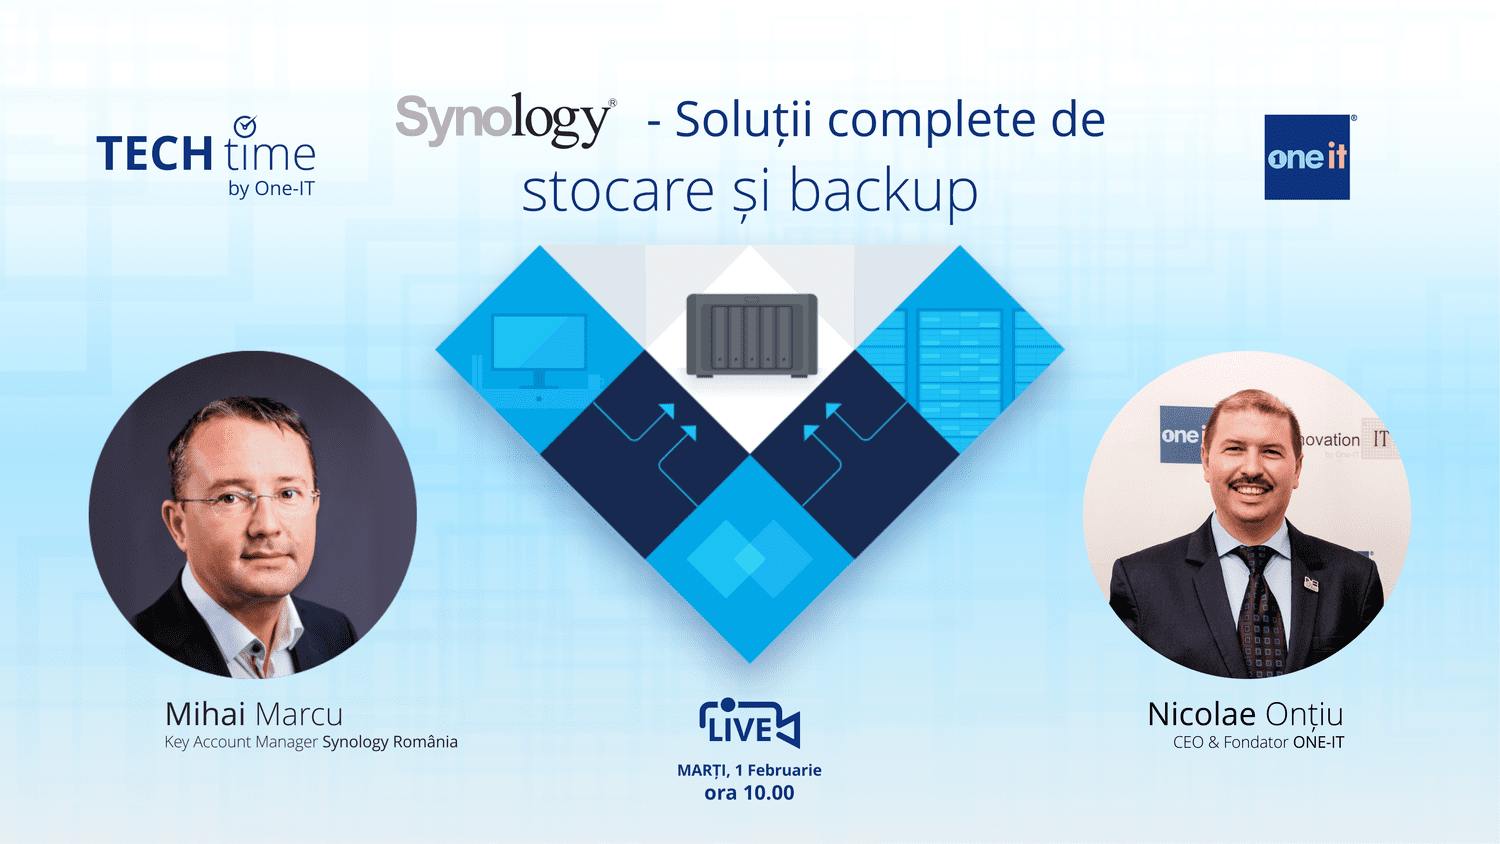 Synology - TECH time